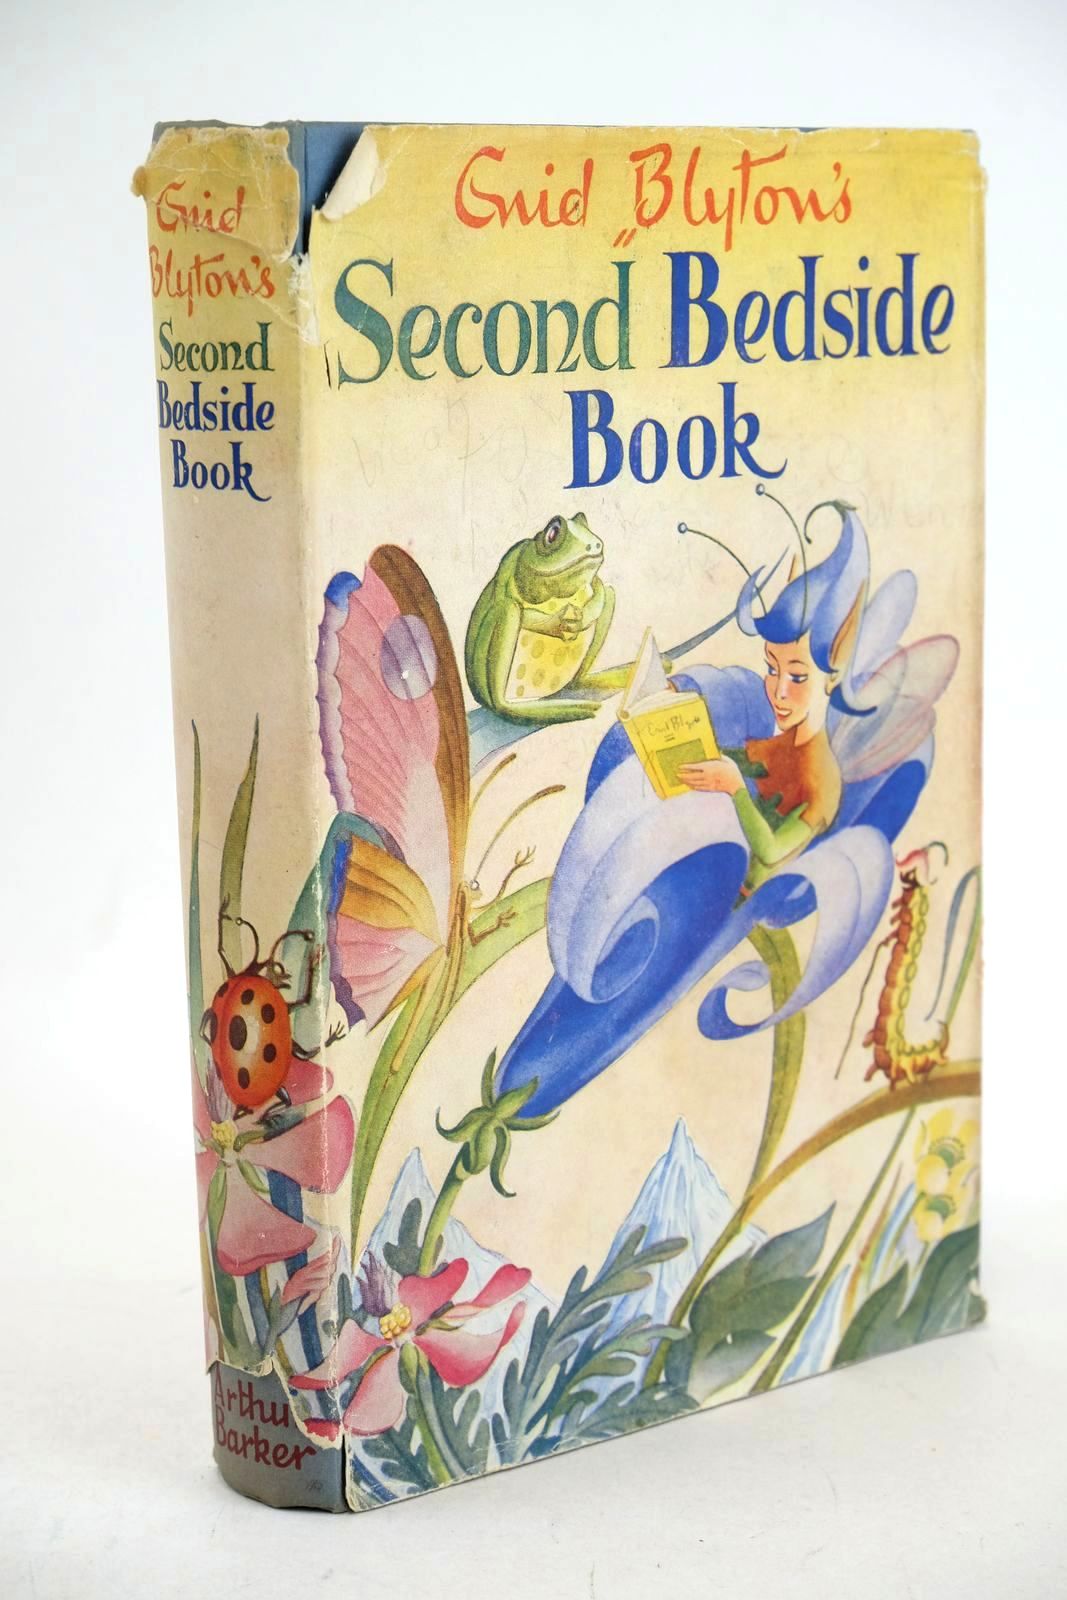 Photo of ENID BLYTON'S SECOND BEDSIDE BOOK written by Blyton, Enid published by Arthur Barker Ltd. (STOCK CODE: 1326811)  for sale by Stella & Rose's Books